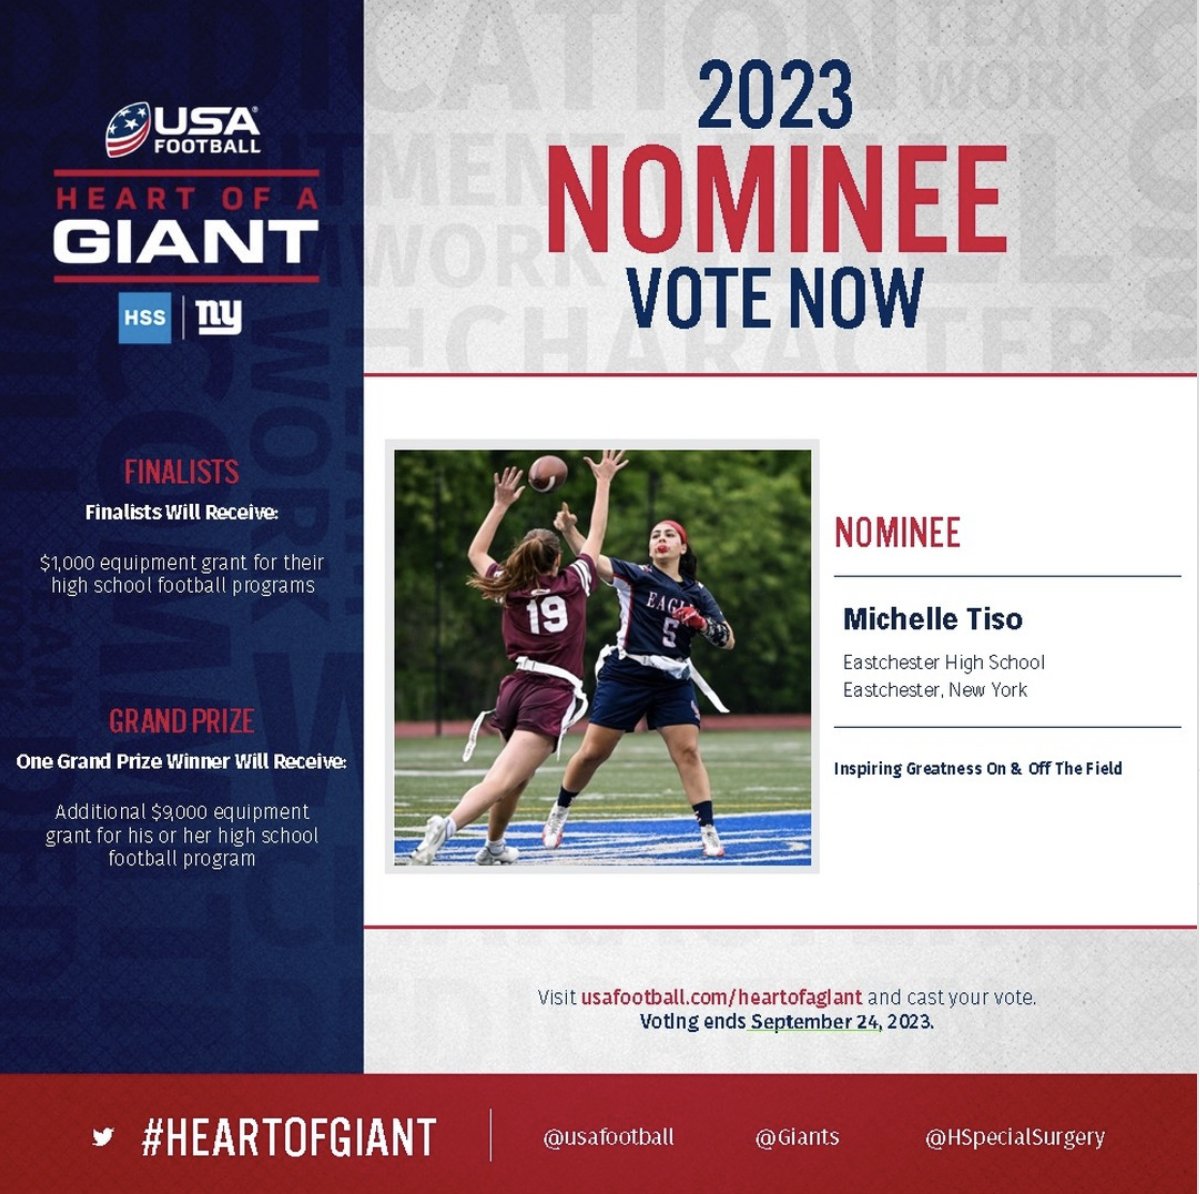 Michelle Tiso from @Eagle___Nation has been Nominated for USA Football’s “Heart of a Giant” Award! The program shines a light on HS student-athletes who demonstrate a relentless work ethic and unmatched love for the game. Go to usafootball.com/hoagvote and vote for Michelle!